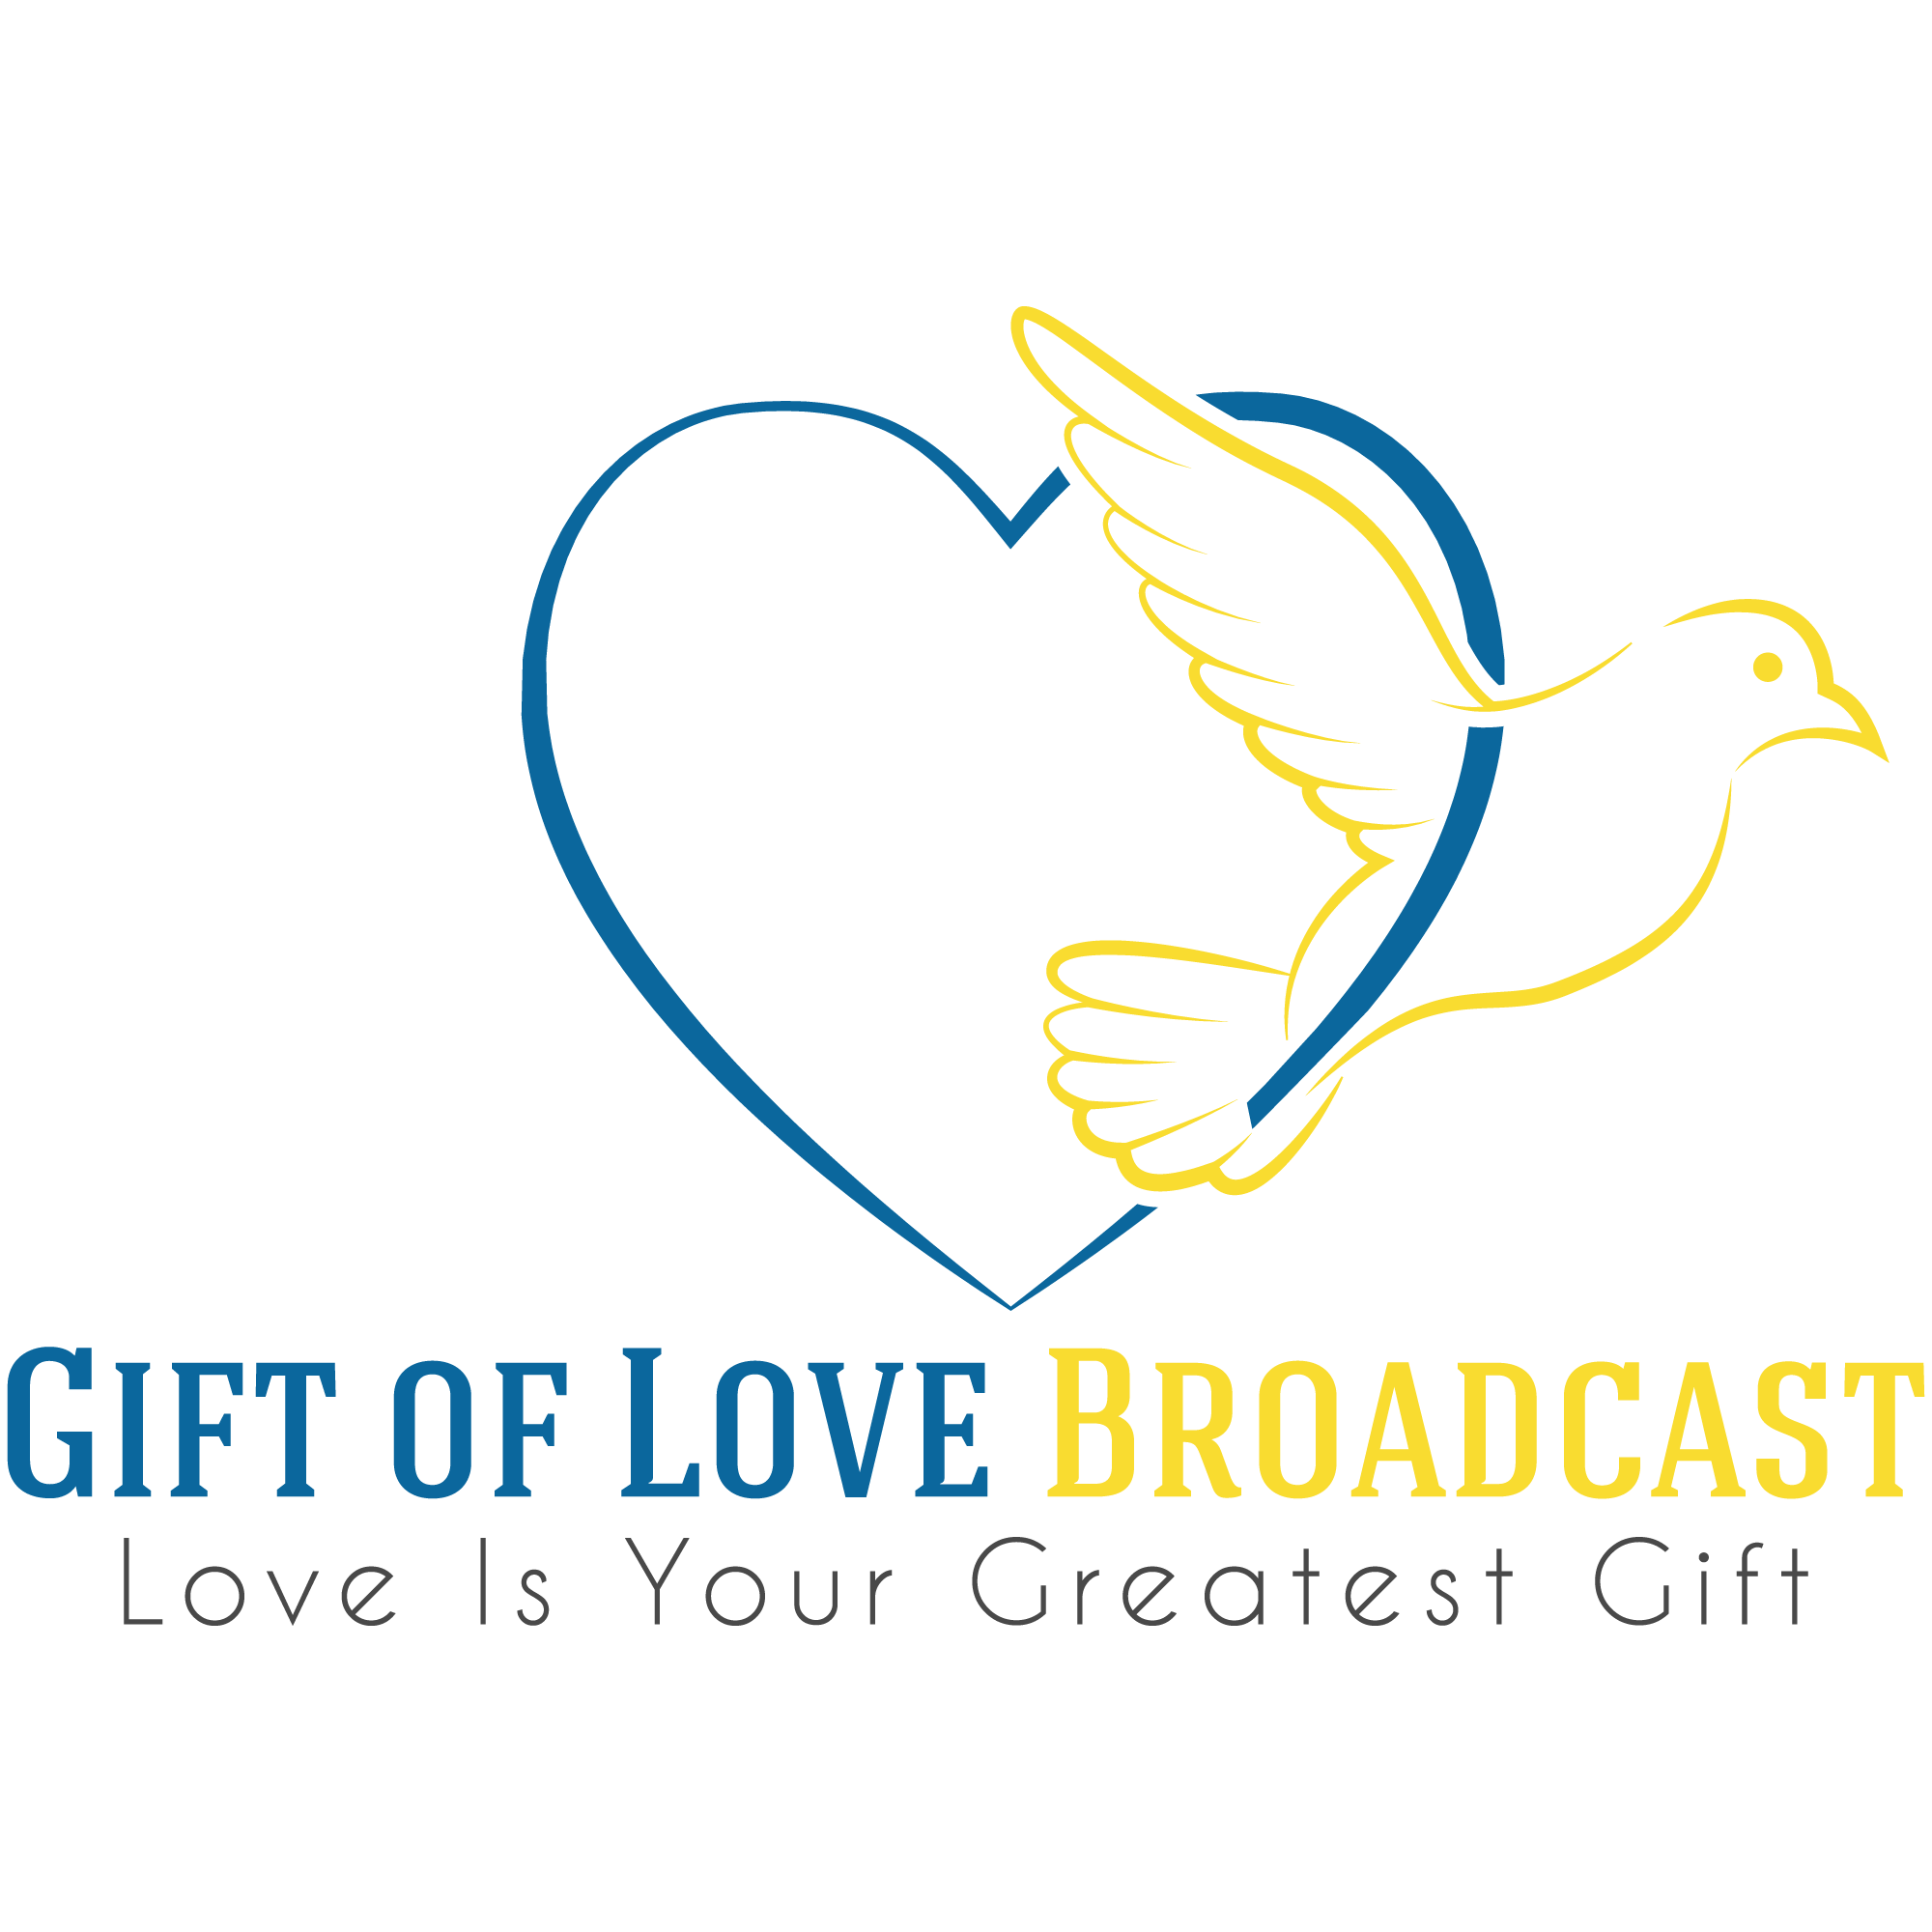 Episode 1: Love Is Your Greatest Gift